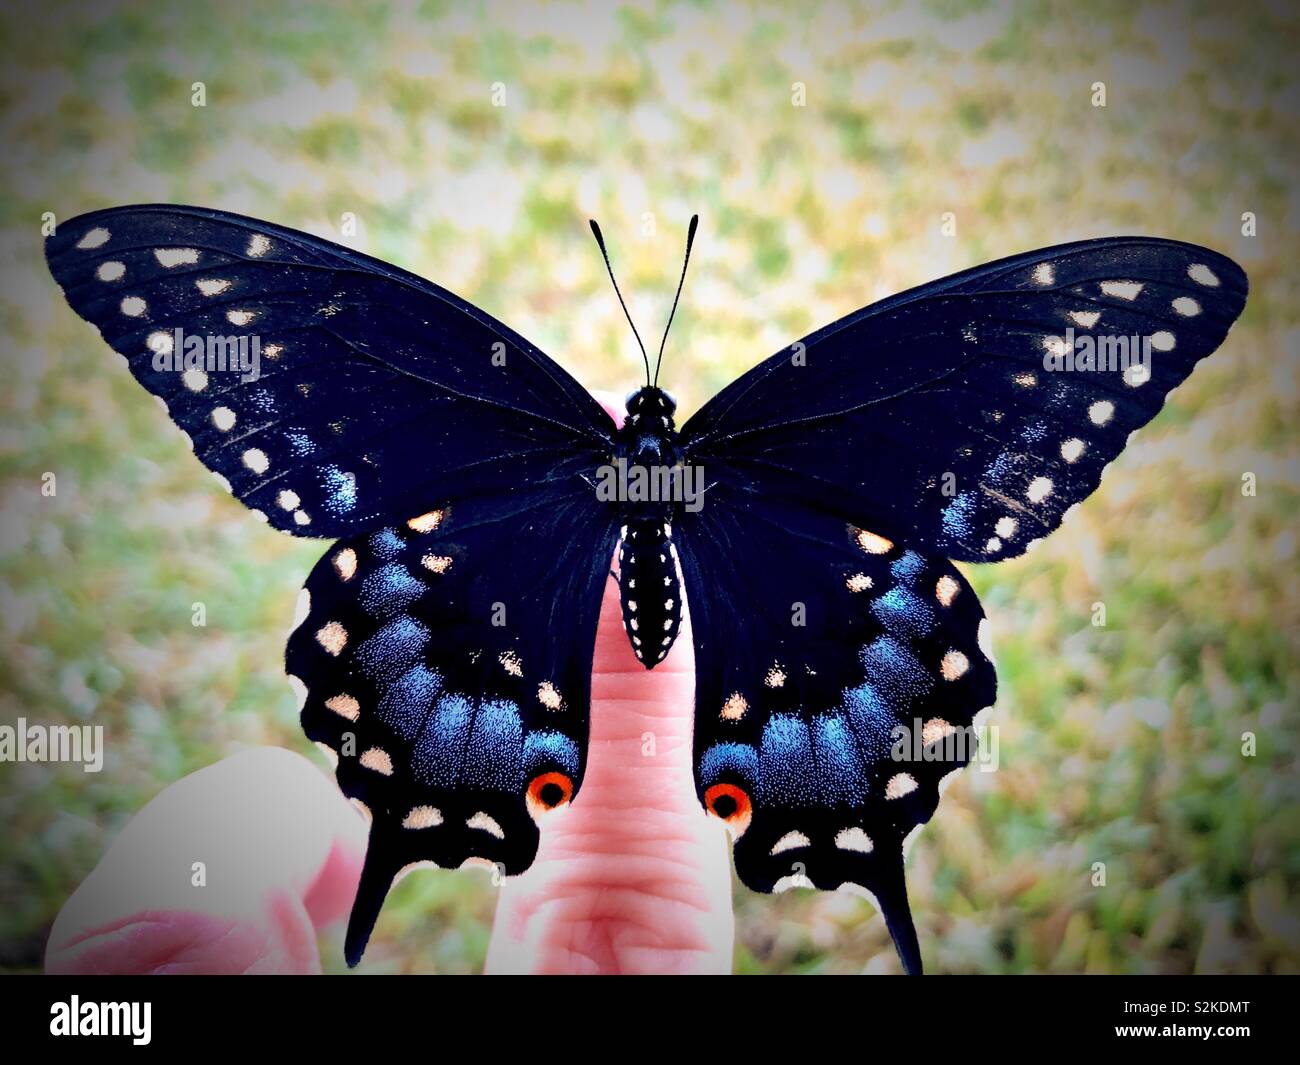 Black swallowtail butterfly on a woman’s hand Stock Photo